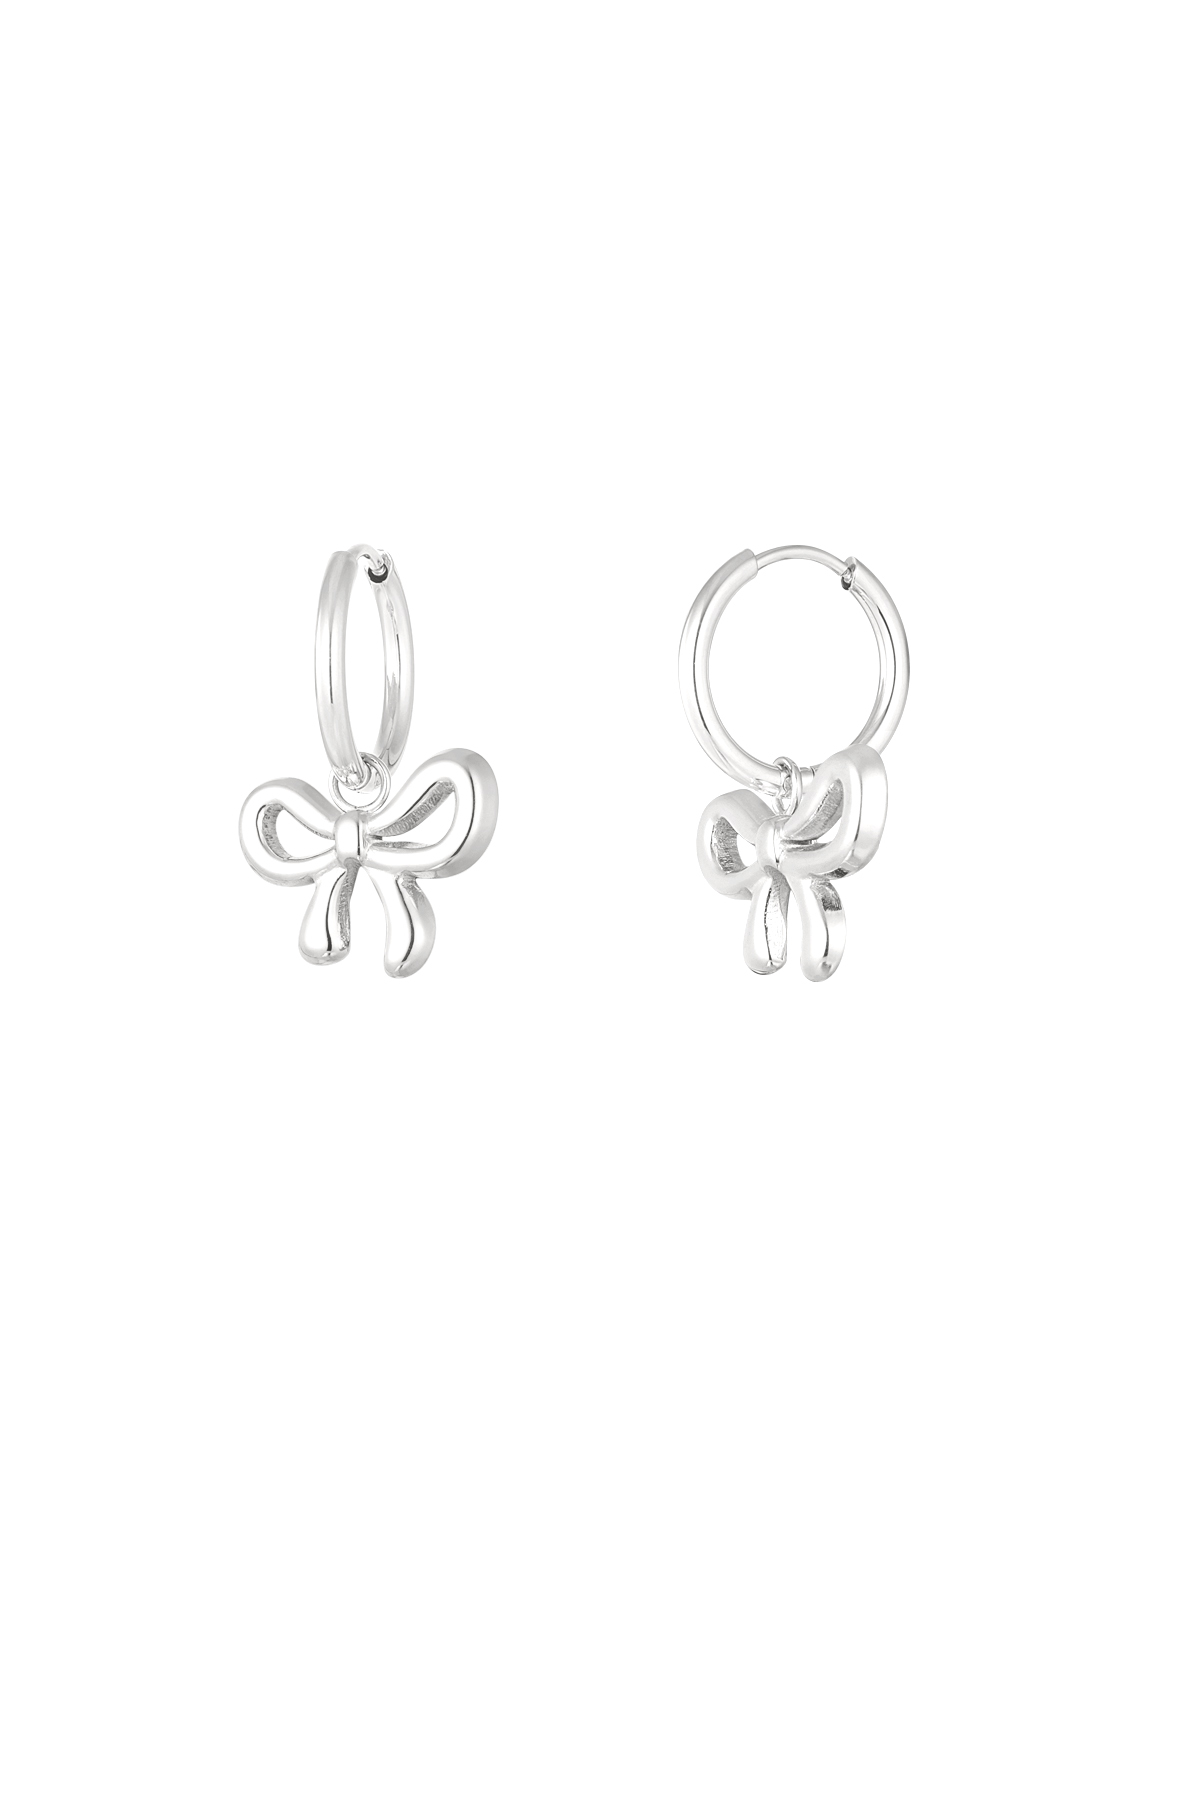 Earrings bow life - silver h5 